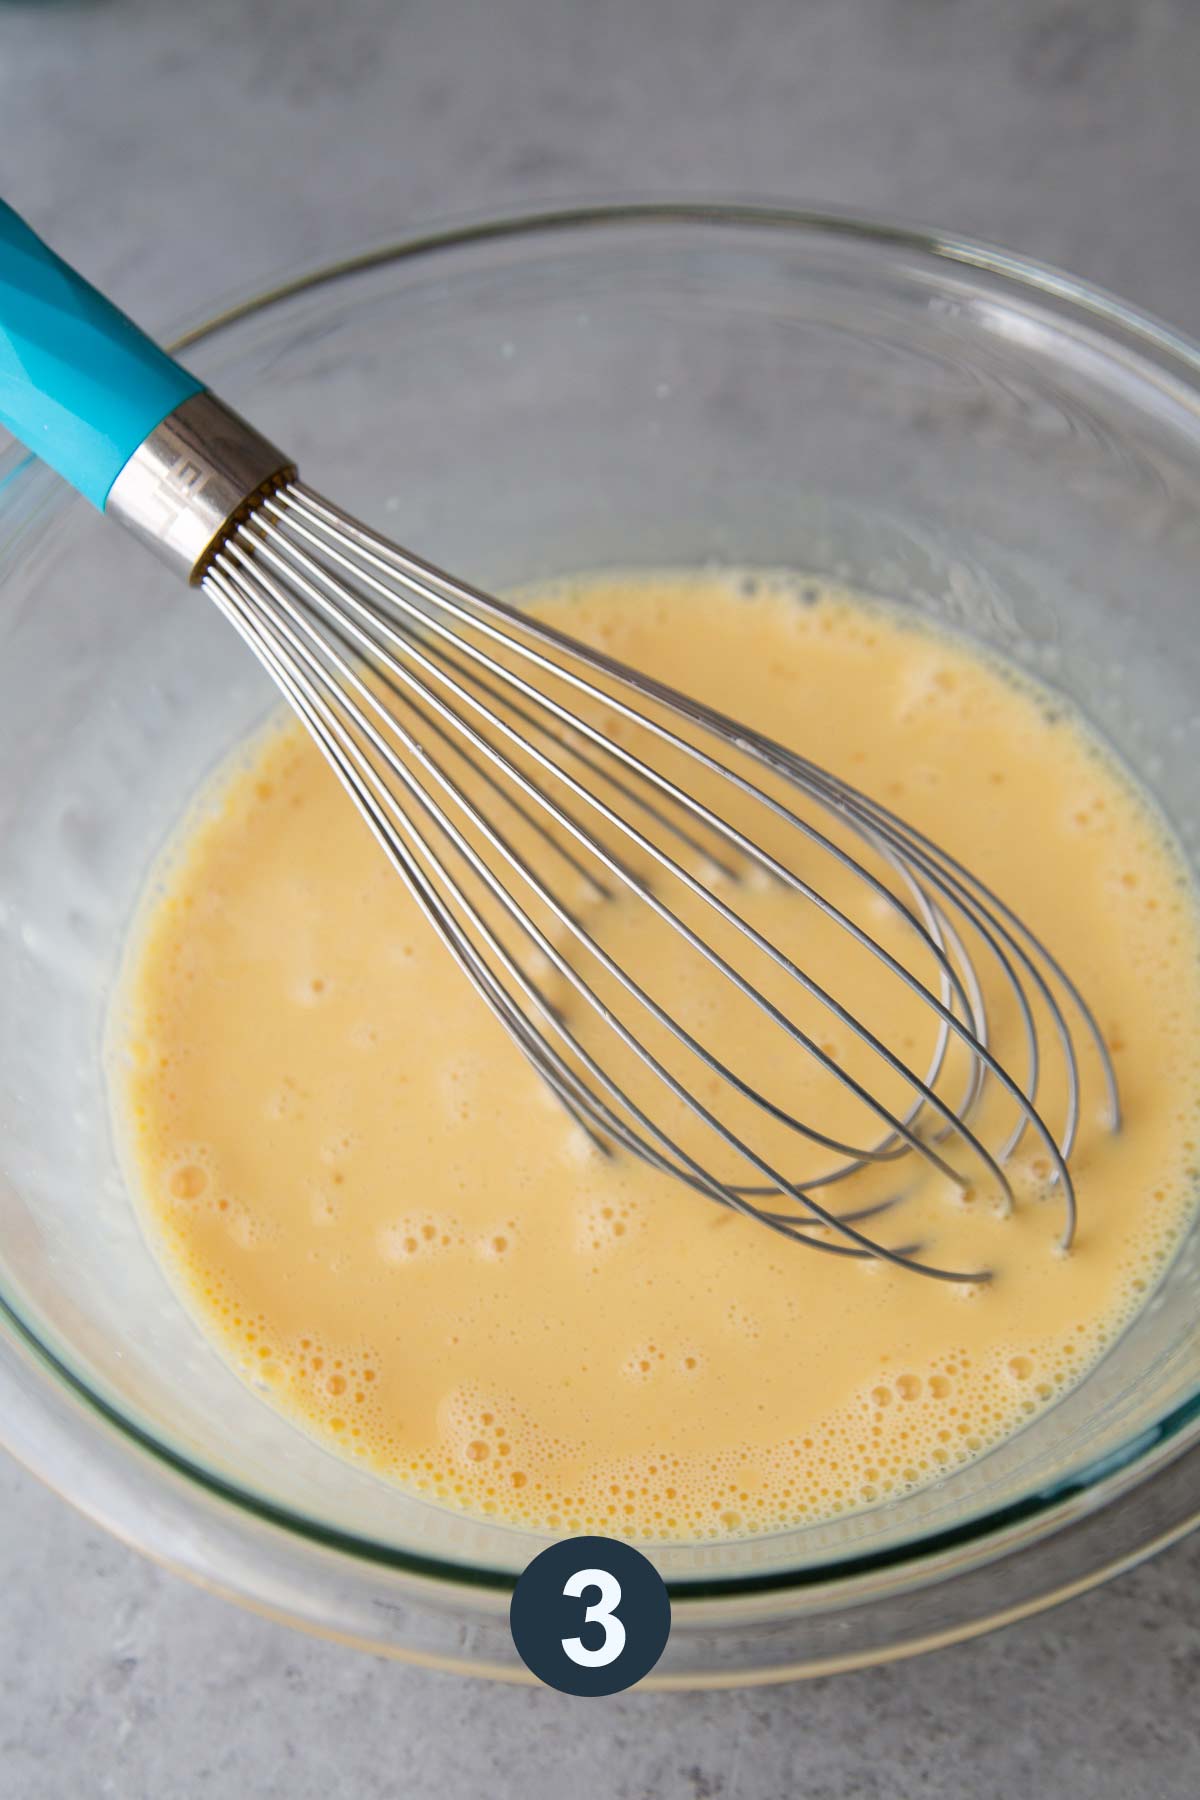 whisk together egg yolks, evaporated milk, and sweetened condensed milk in bowl.